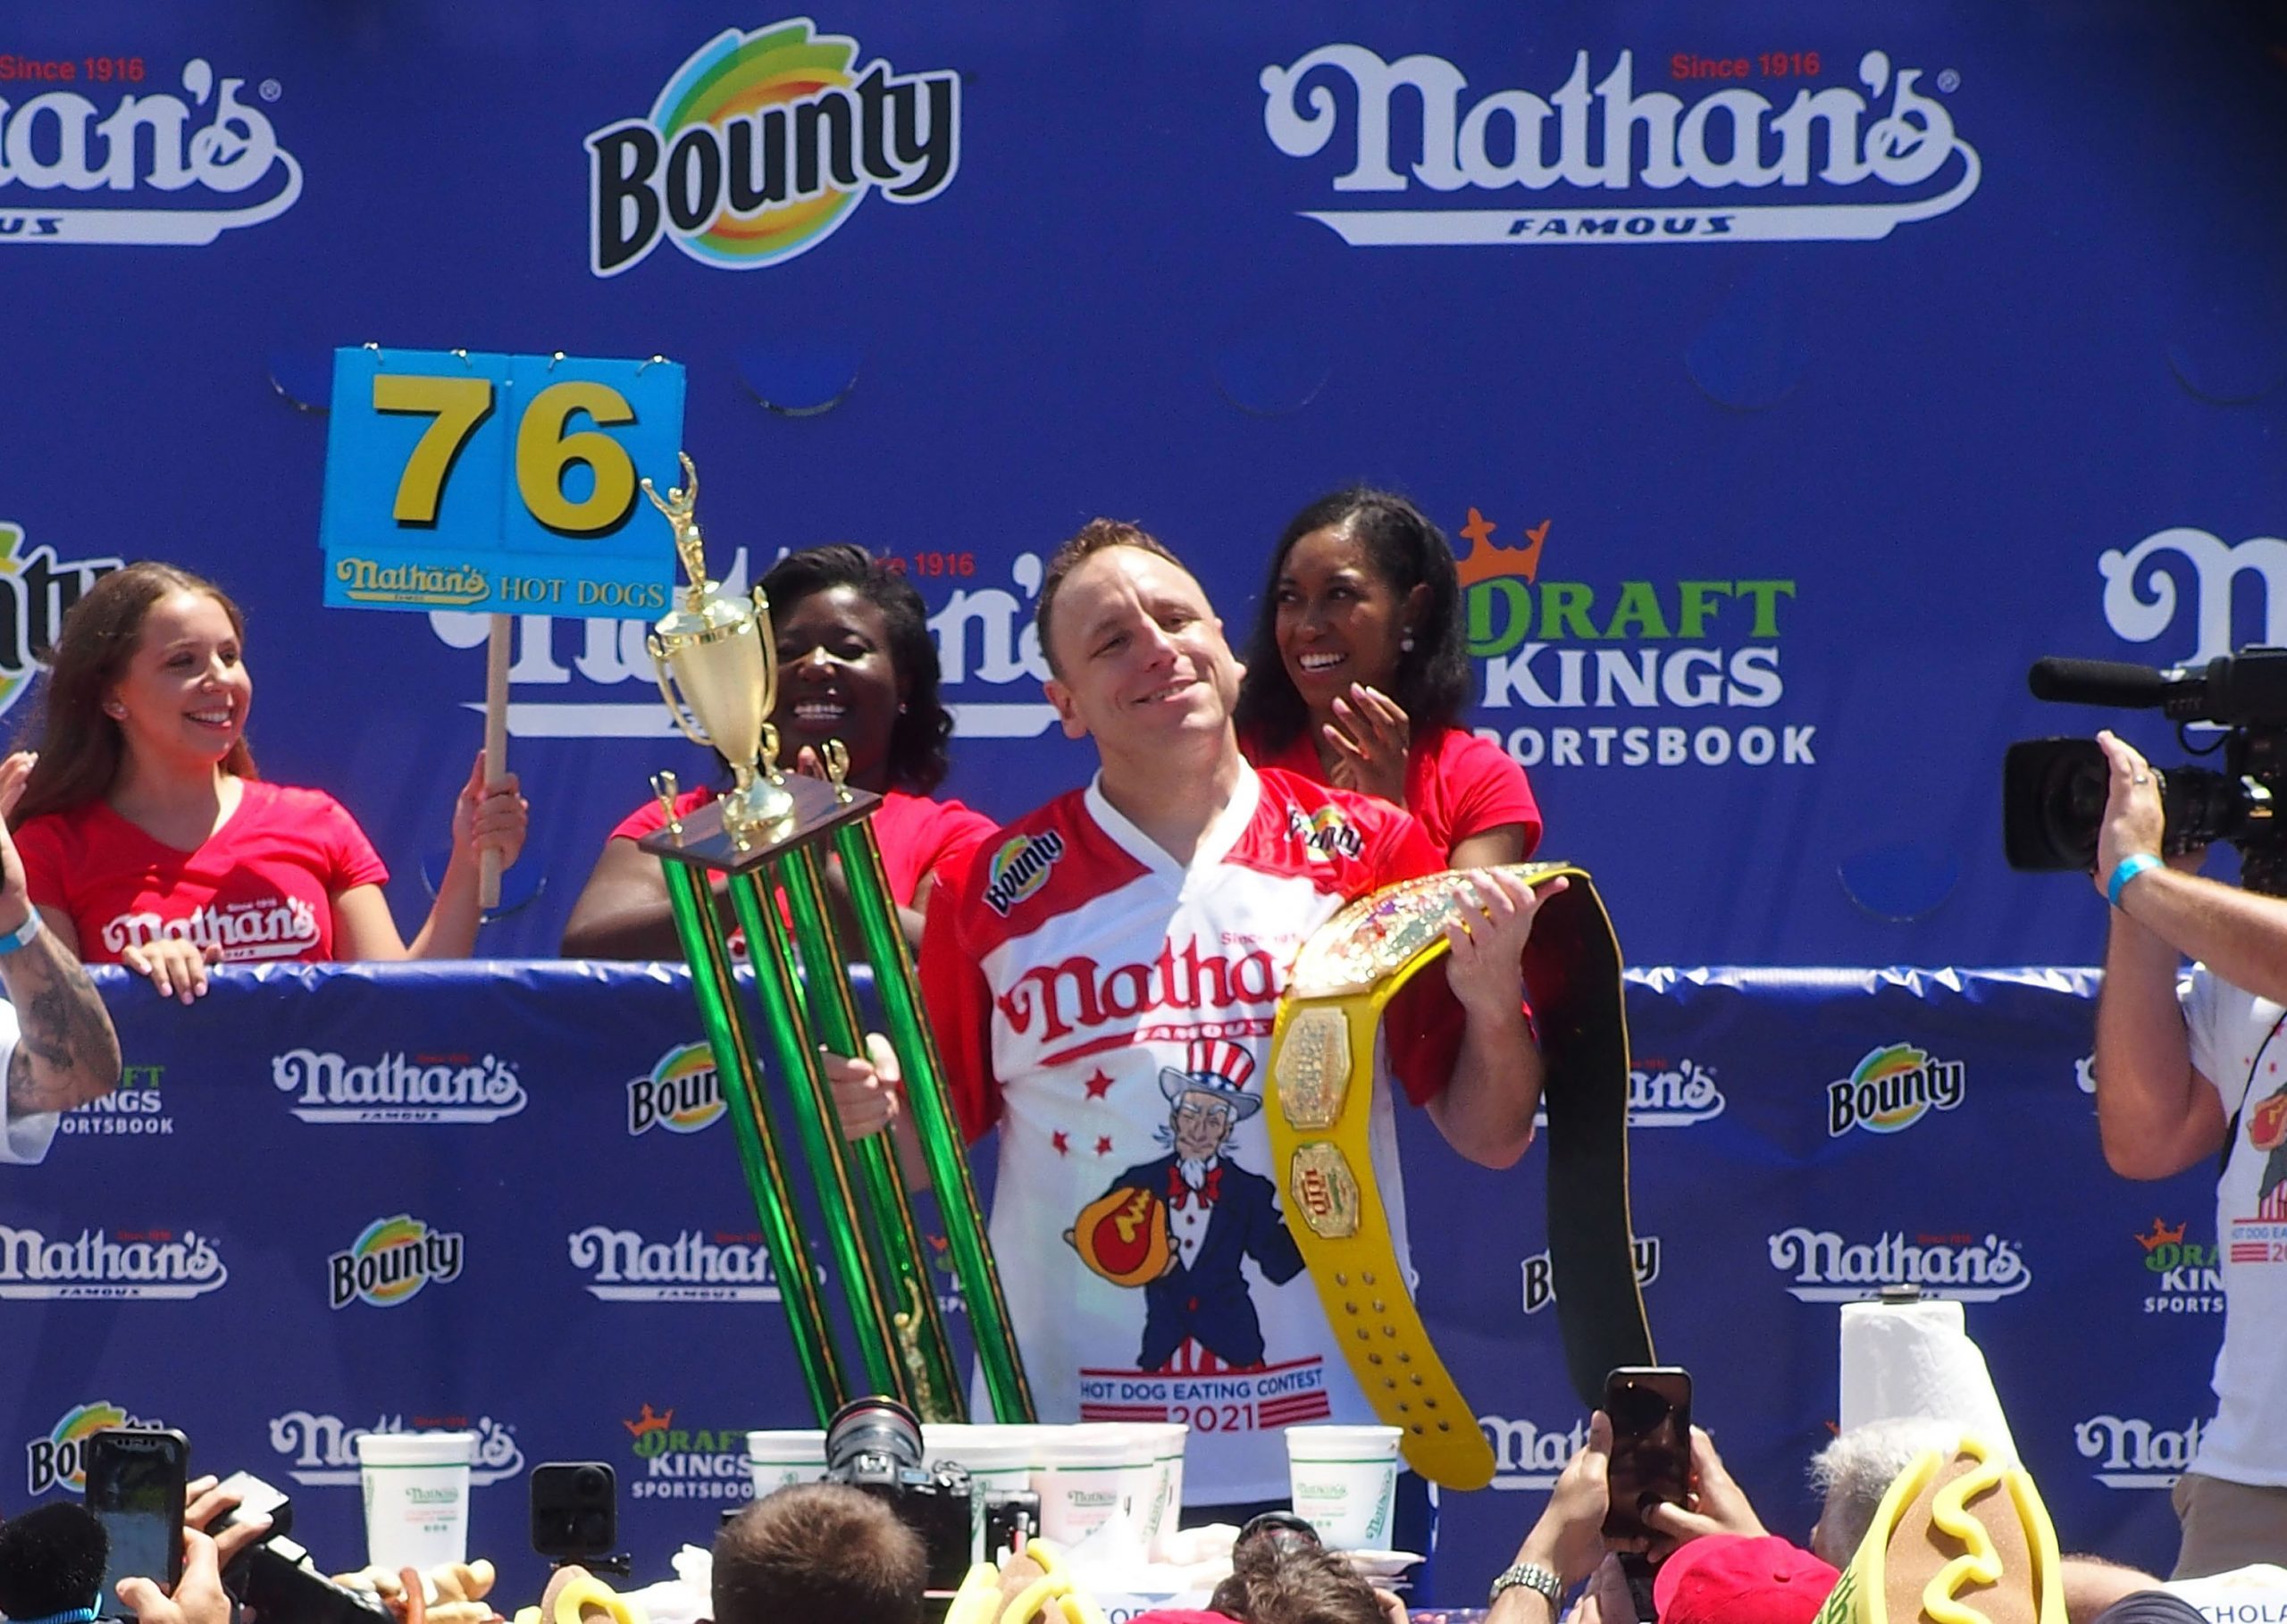 Joey Chestnut wins after consuming 76 hot dogs on July 4, 2021.